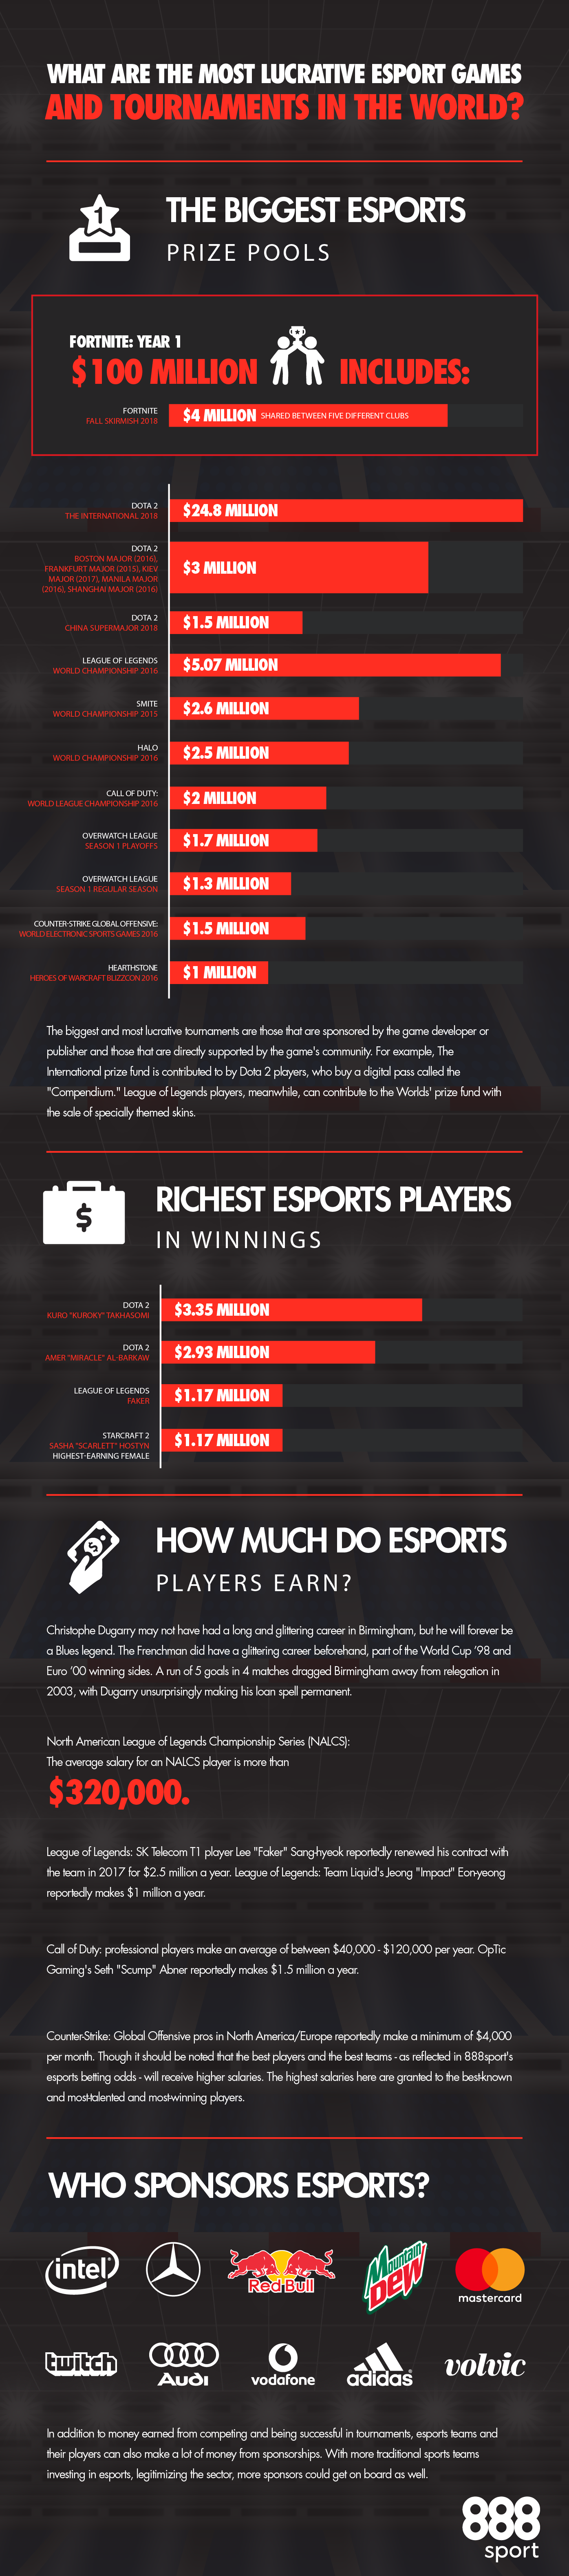 Most Lucrative Games and Tournament in the World